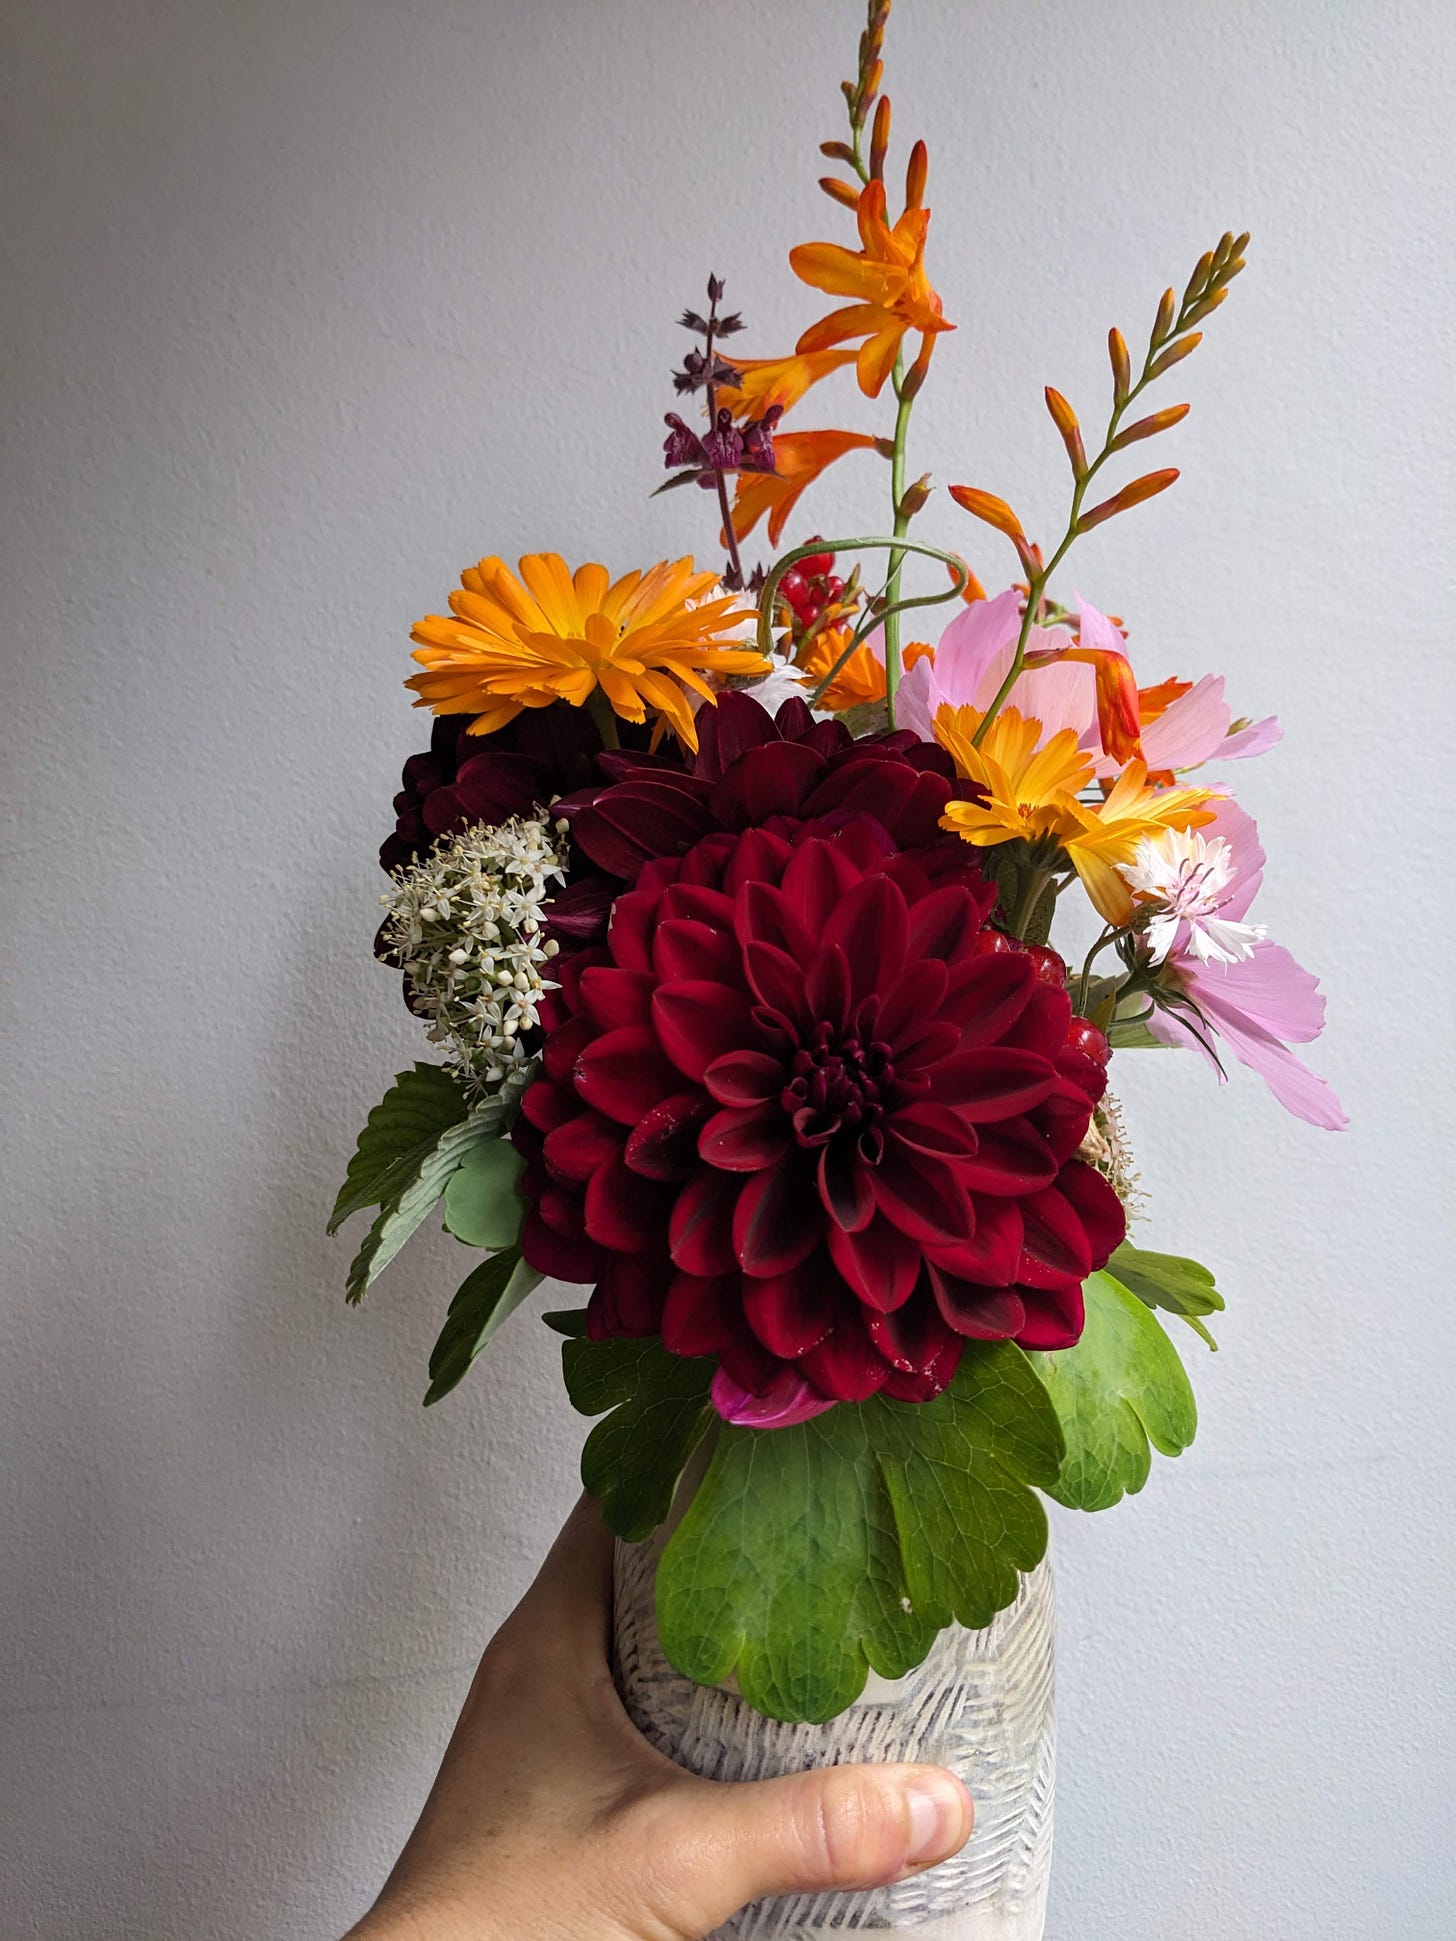 white person's hand holds a pale gray clay vase with deep red dahlias, orange calendula and crocosmia, pink cosmos, white dogwood, pale pink bachelor's buttons, and a magenta lamium, as well as columbine and strawberry leaves